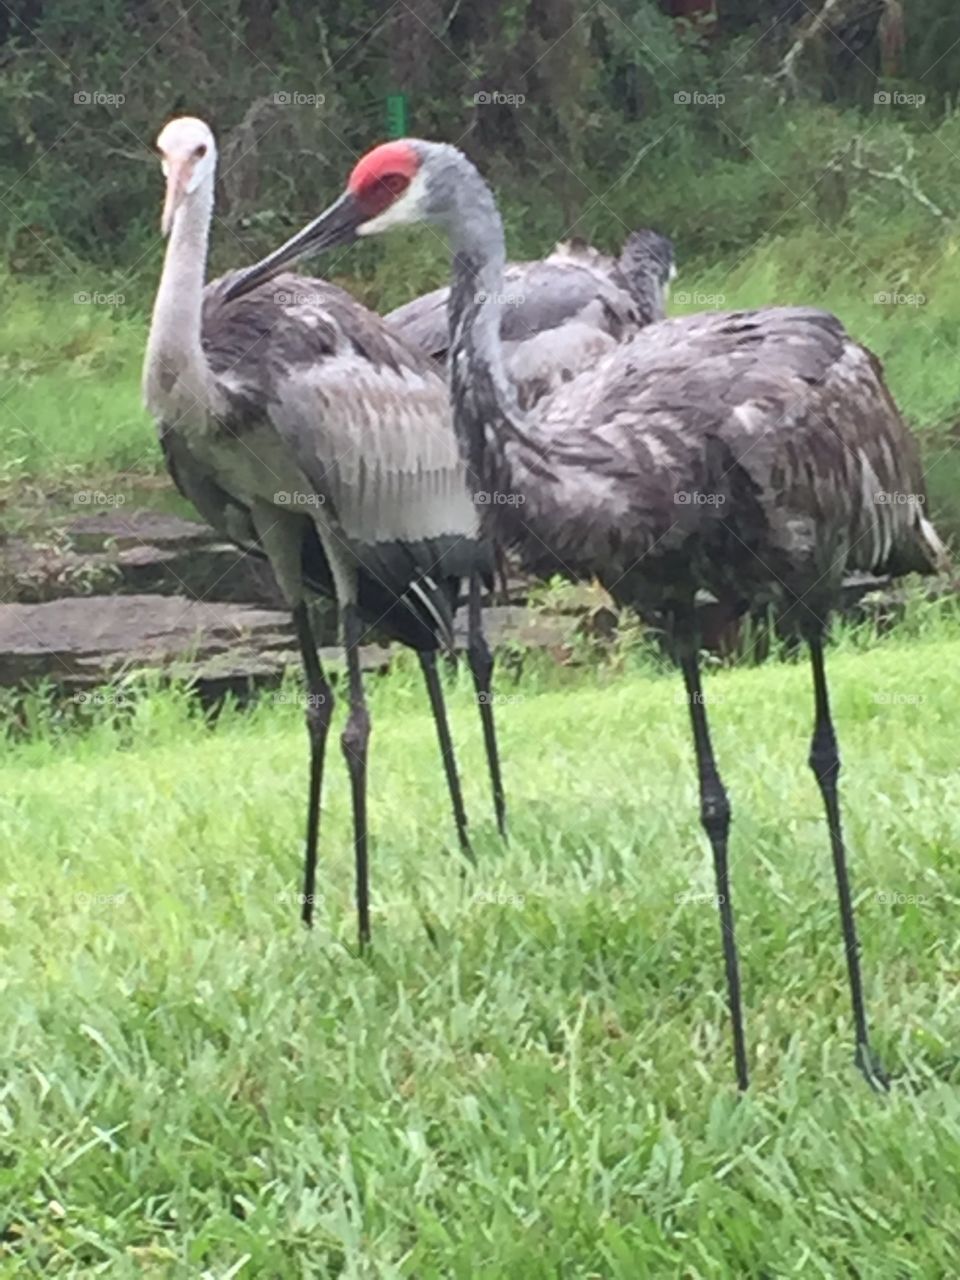 Sandhill crane family with 2 babies